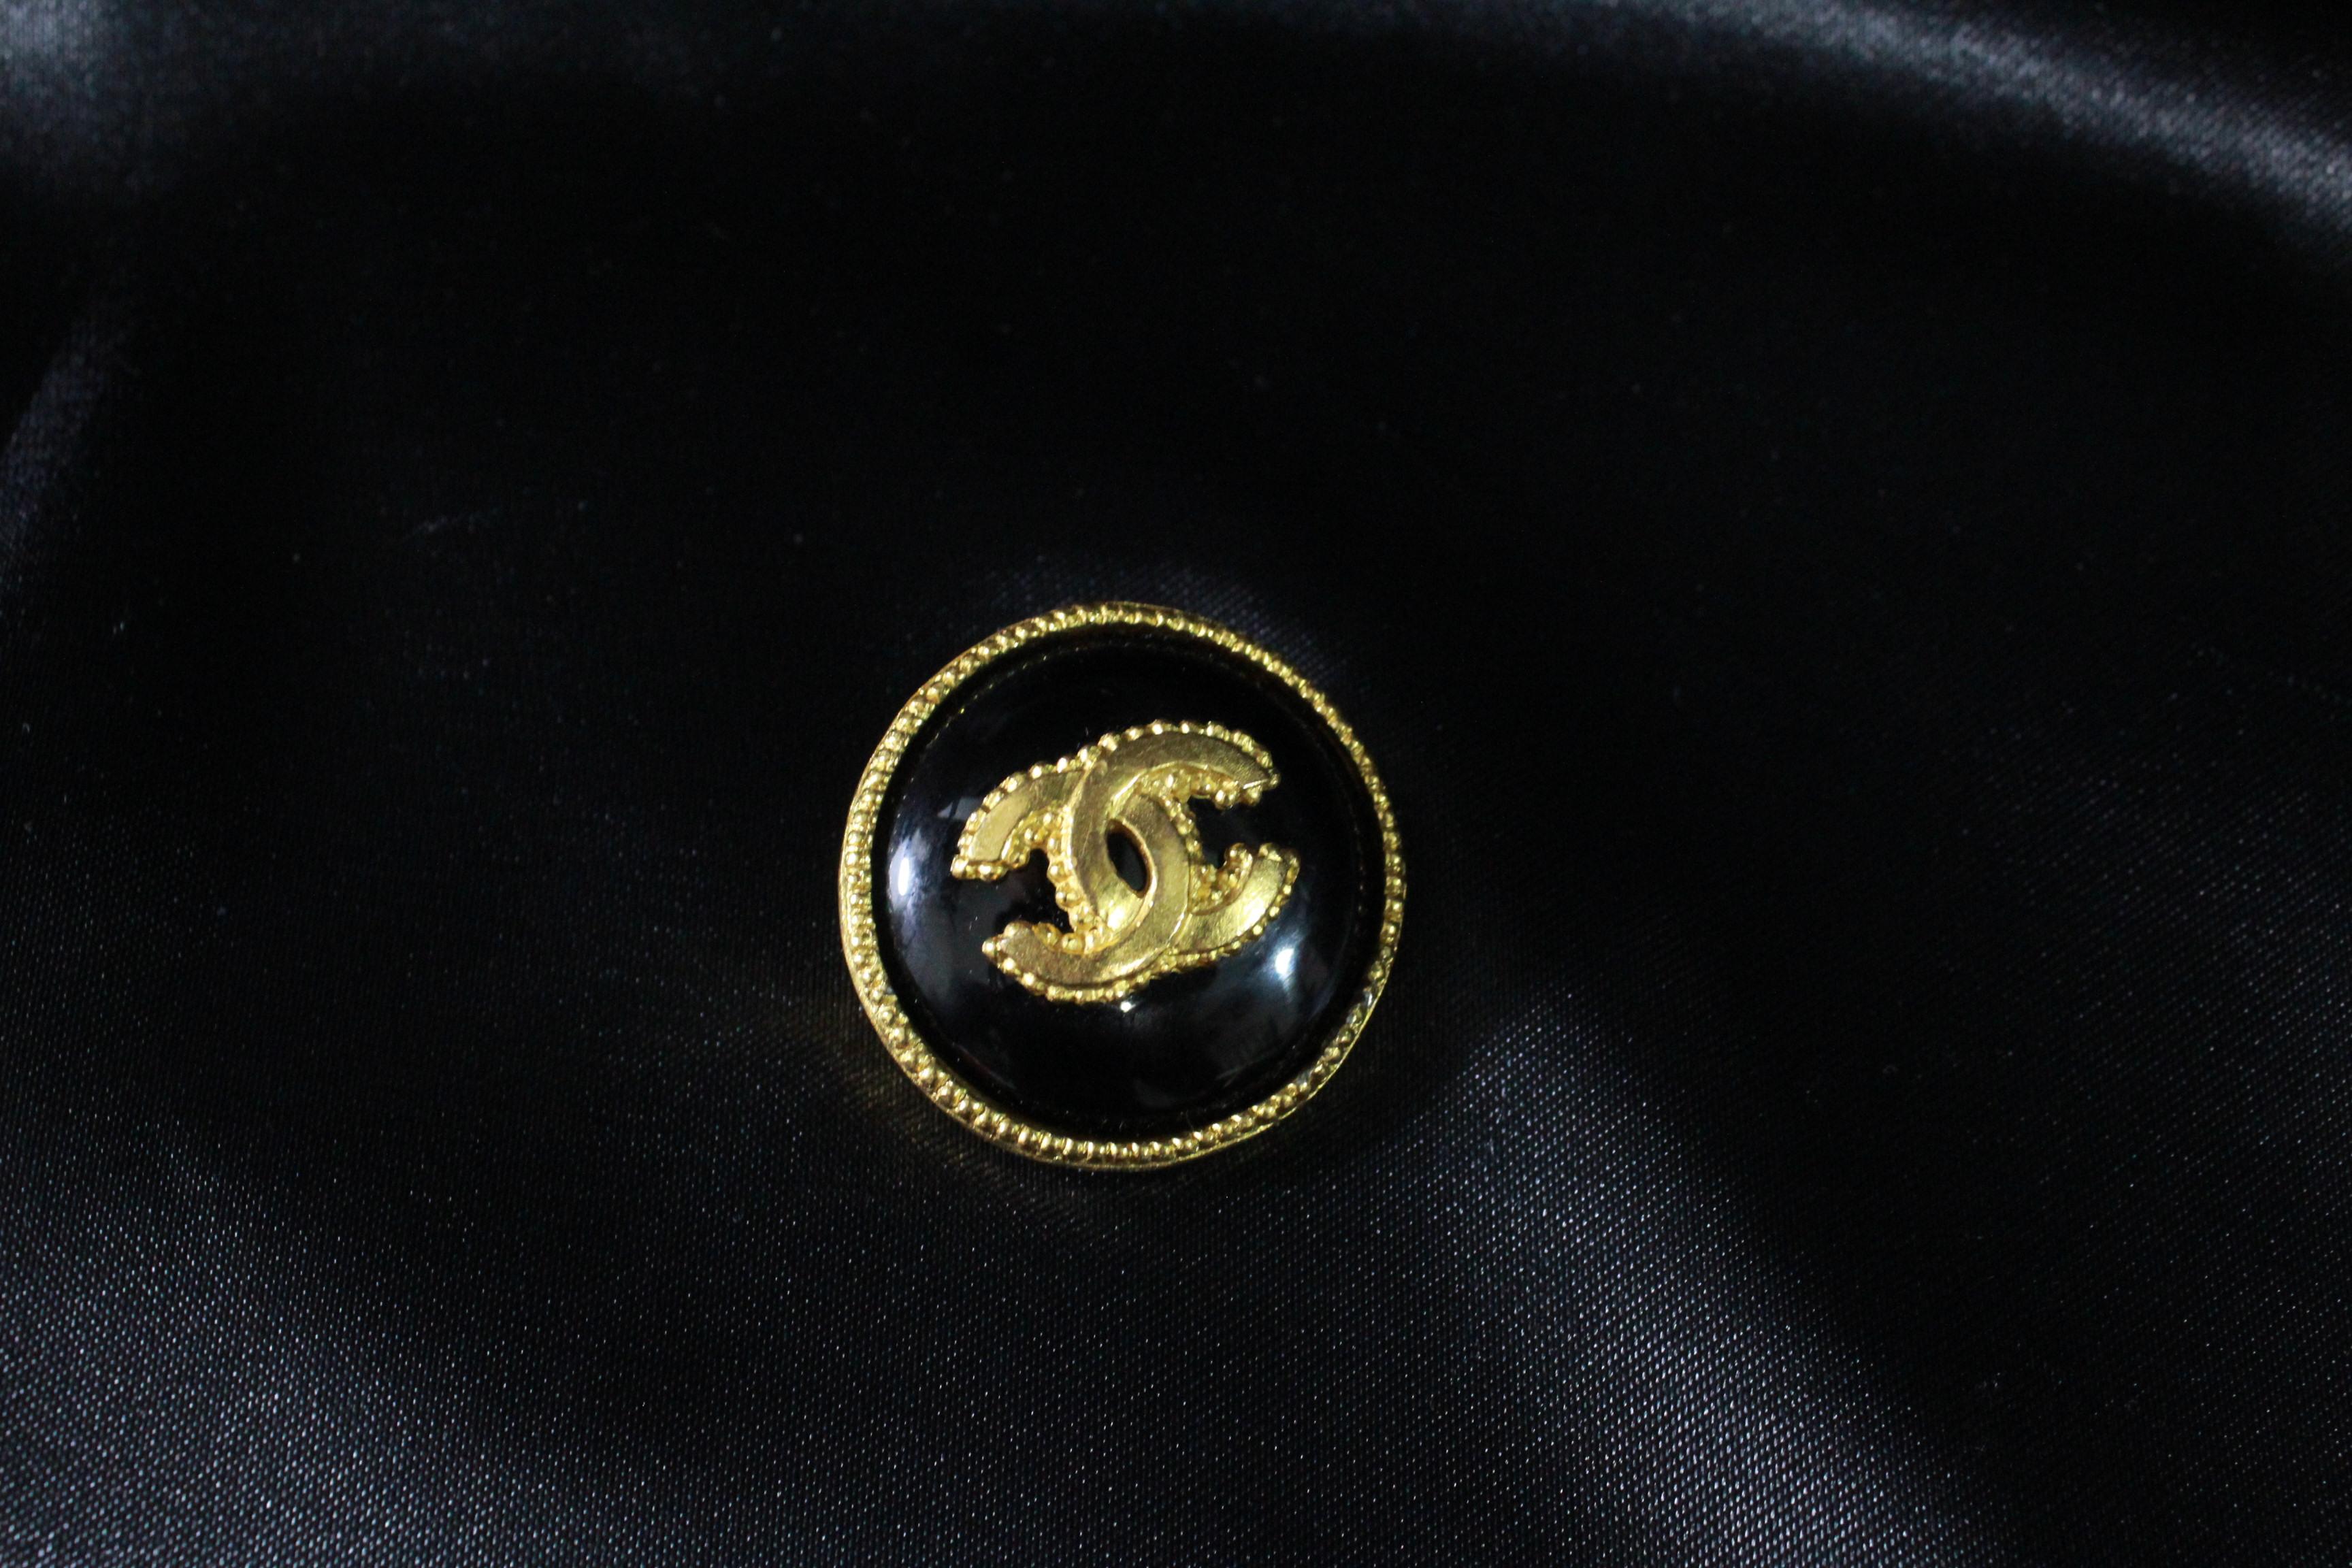 Vintage 1996 Chanel brooch in gold plated metal and black lacquer.
Diameter 3.5 cm
Marked 